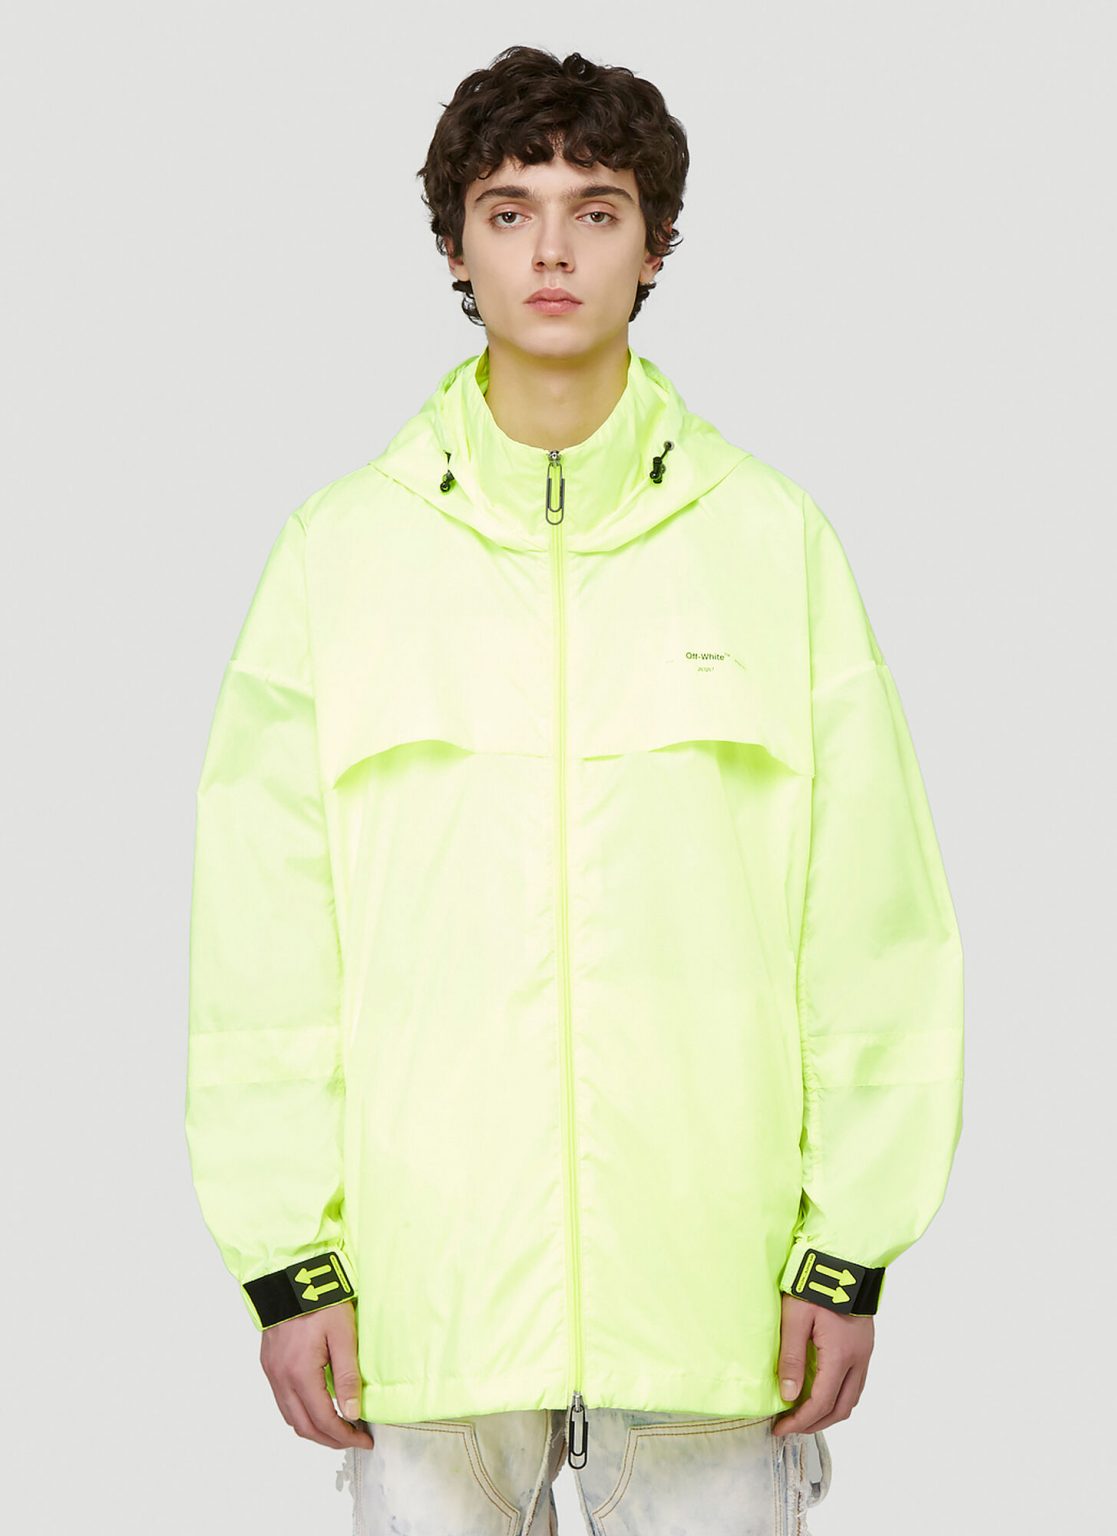 Off-White Hooded Windbreaker Jacket in Yellow size M | The Fashionisto